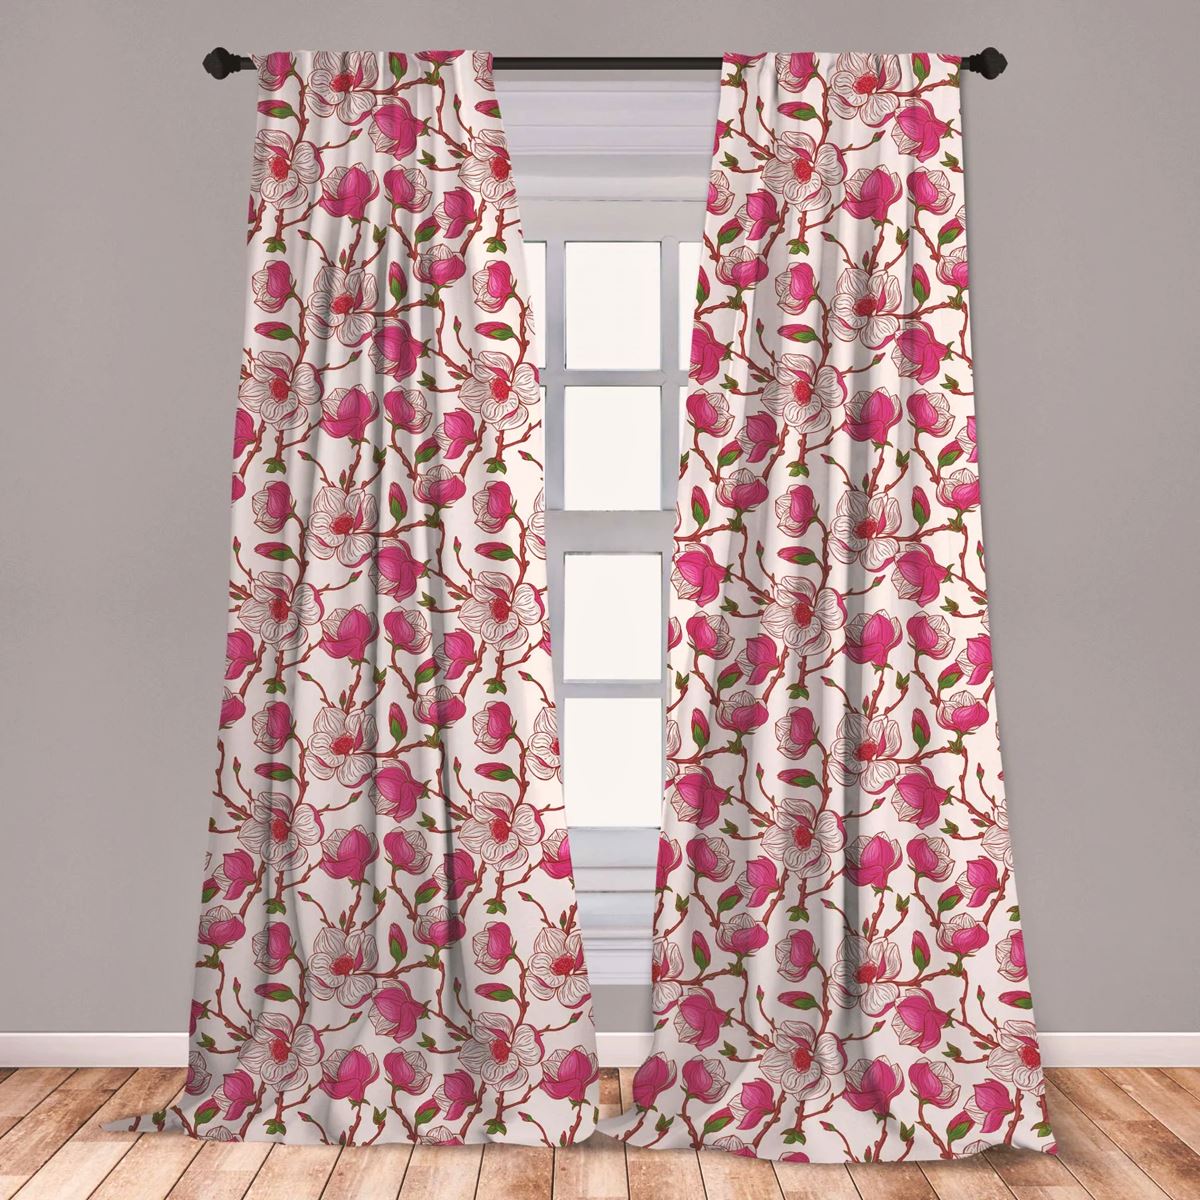 How To Make Flower Curtain